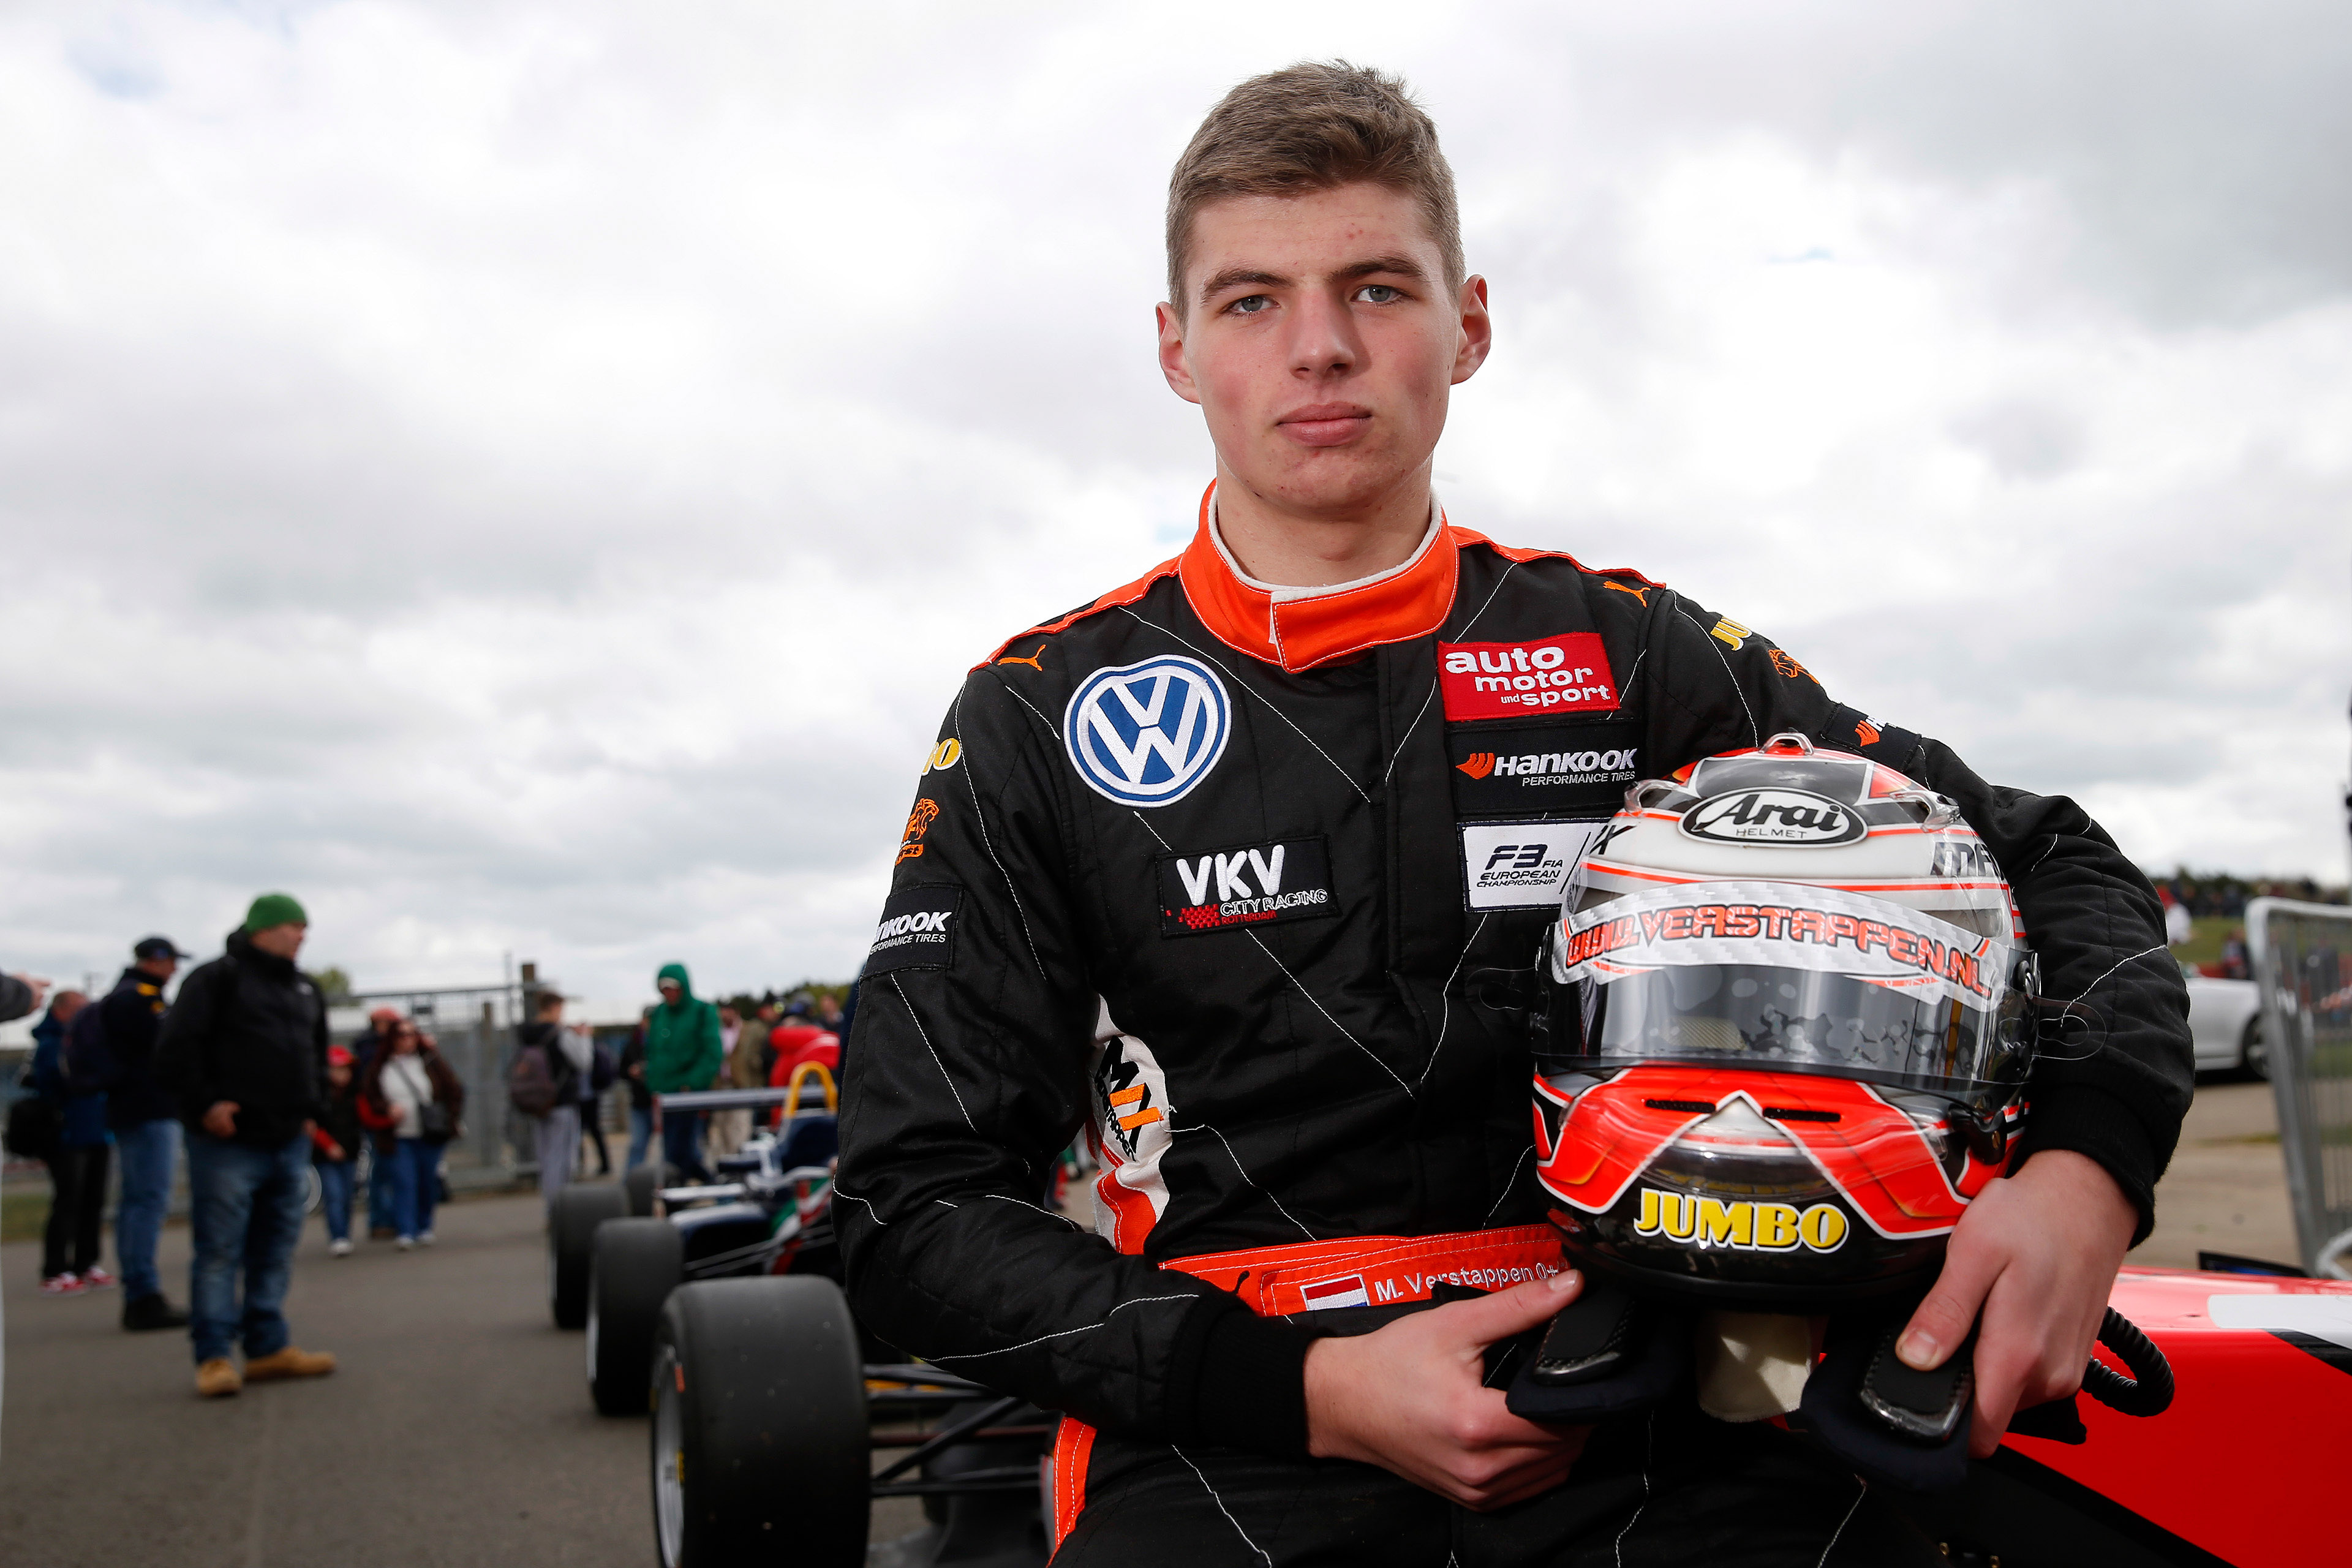 Max Verstappen “Securing the Title in my Debut Season will be